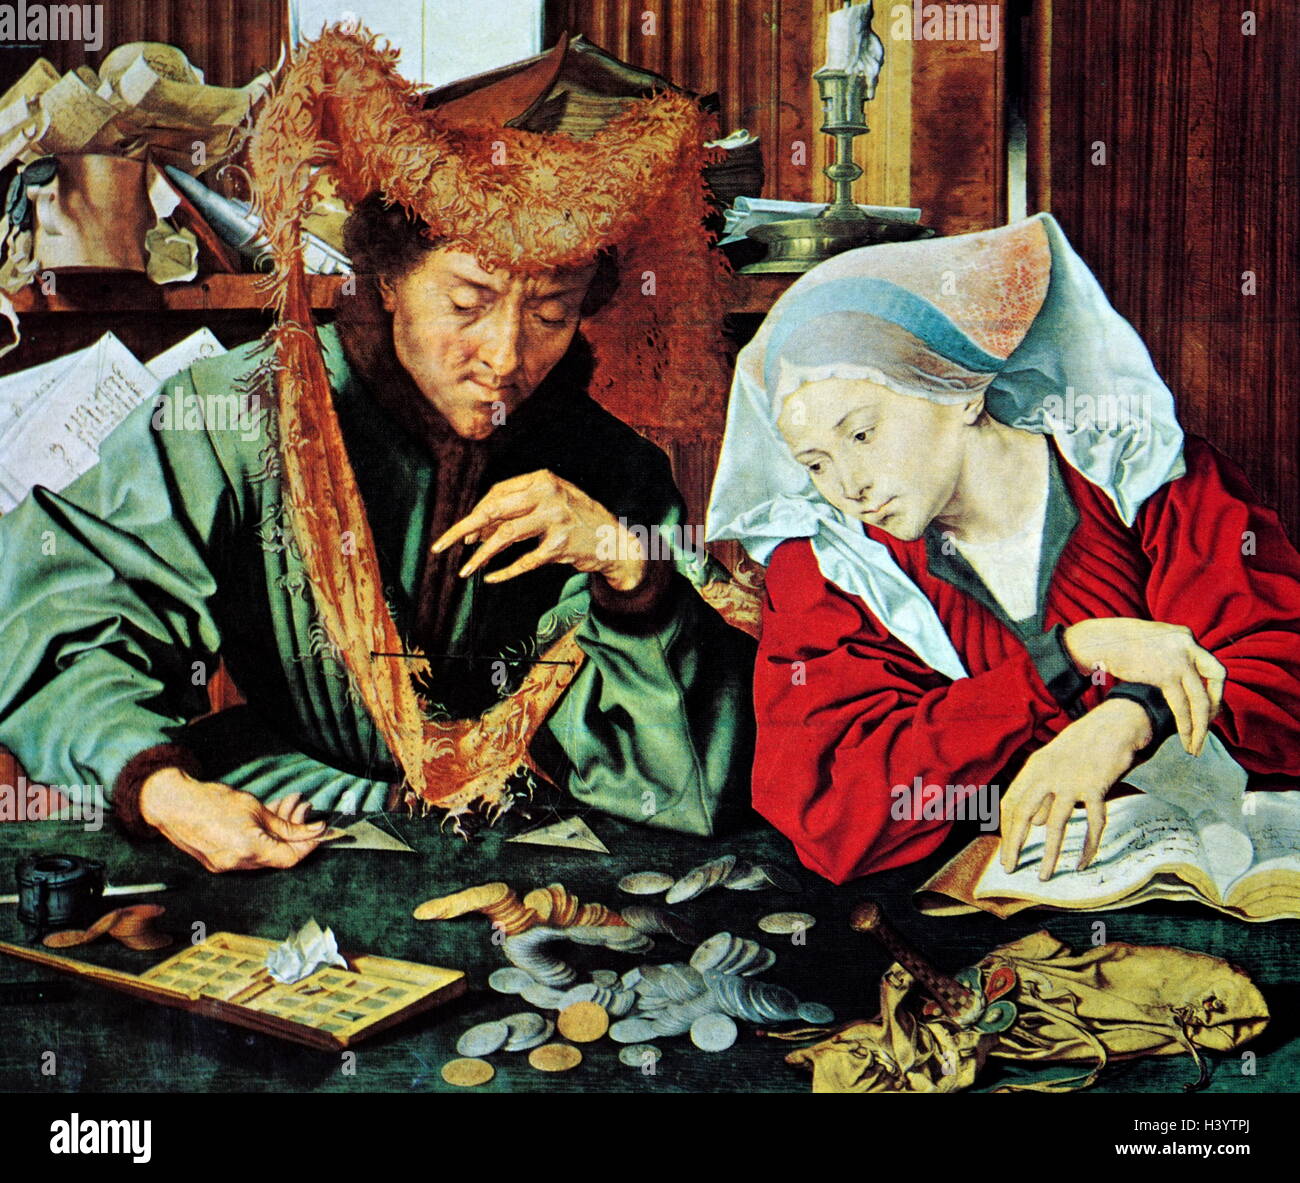 Painting titled 'The Money Changer and his Wife' by Marinus van Reymerswaele (1490-1546) a Dutch painter. Dated 16th Century Stock Photo